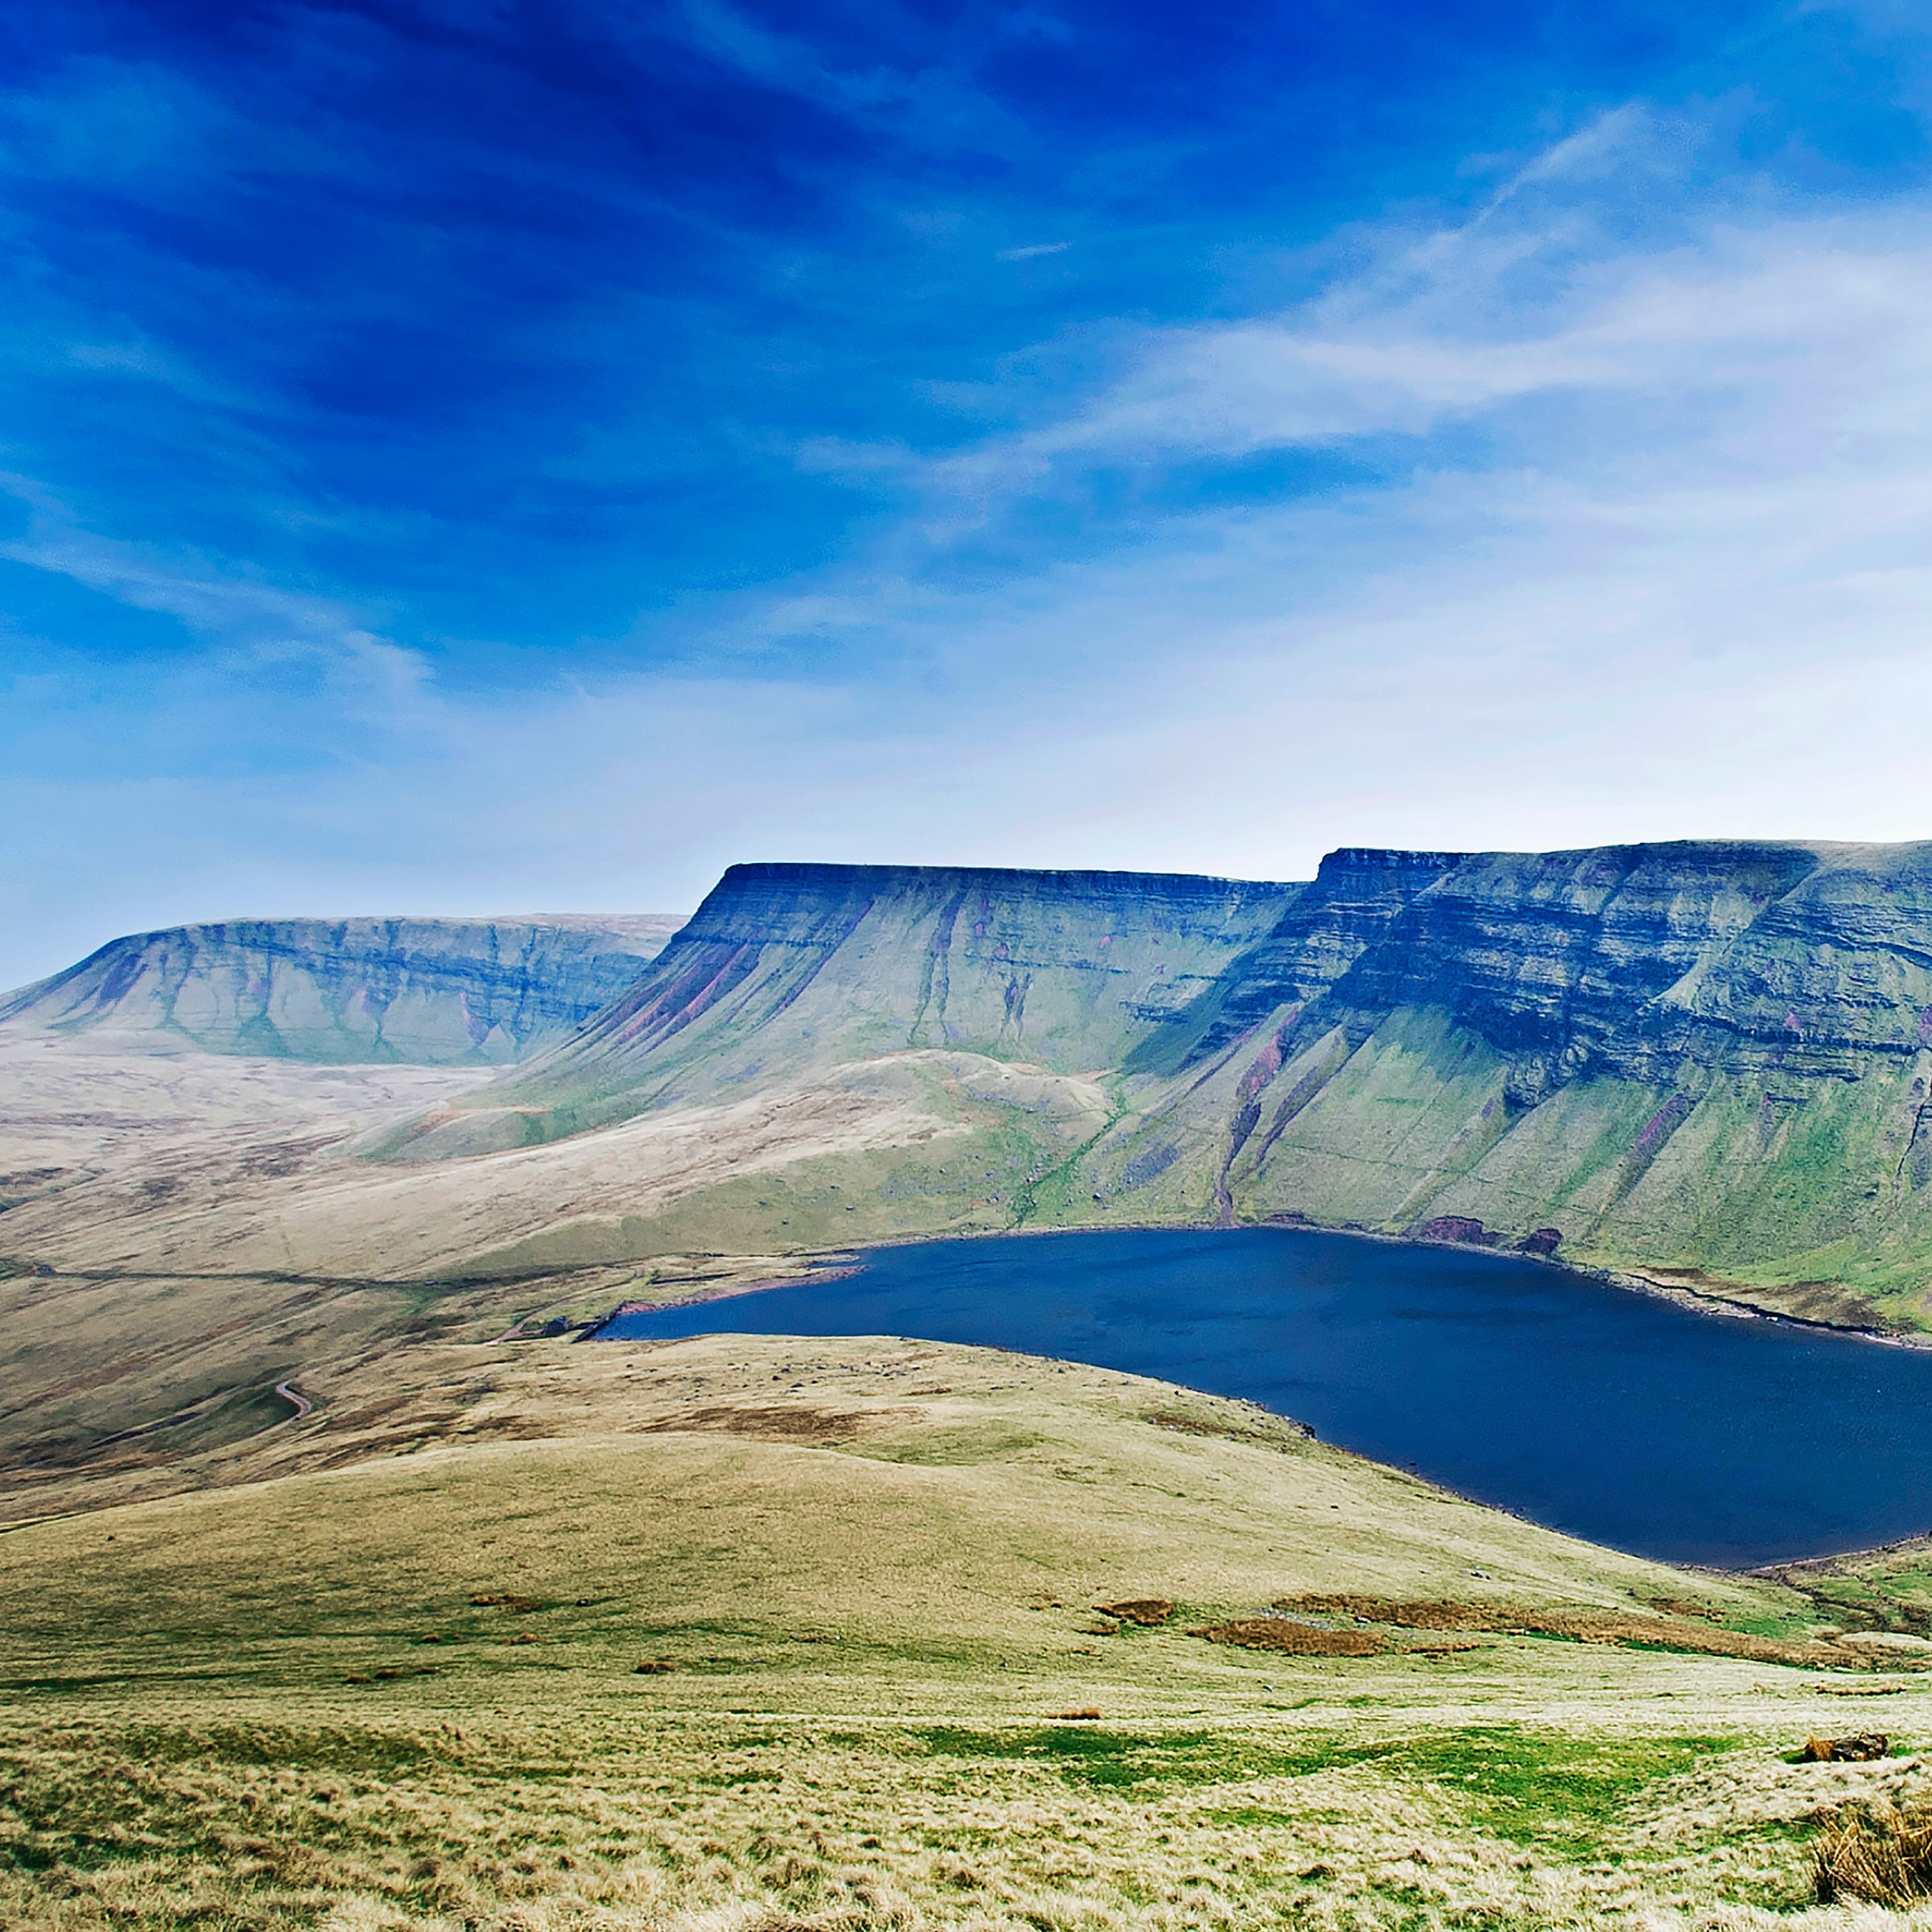 ​The Best Picturesque Views in the UK